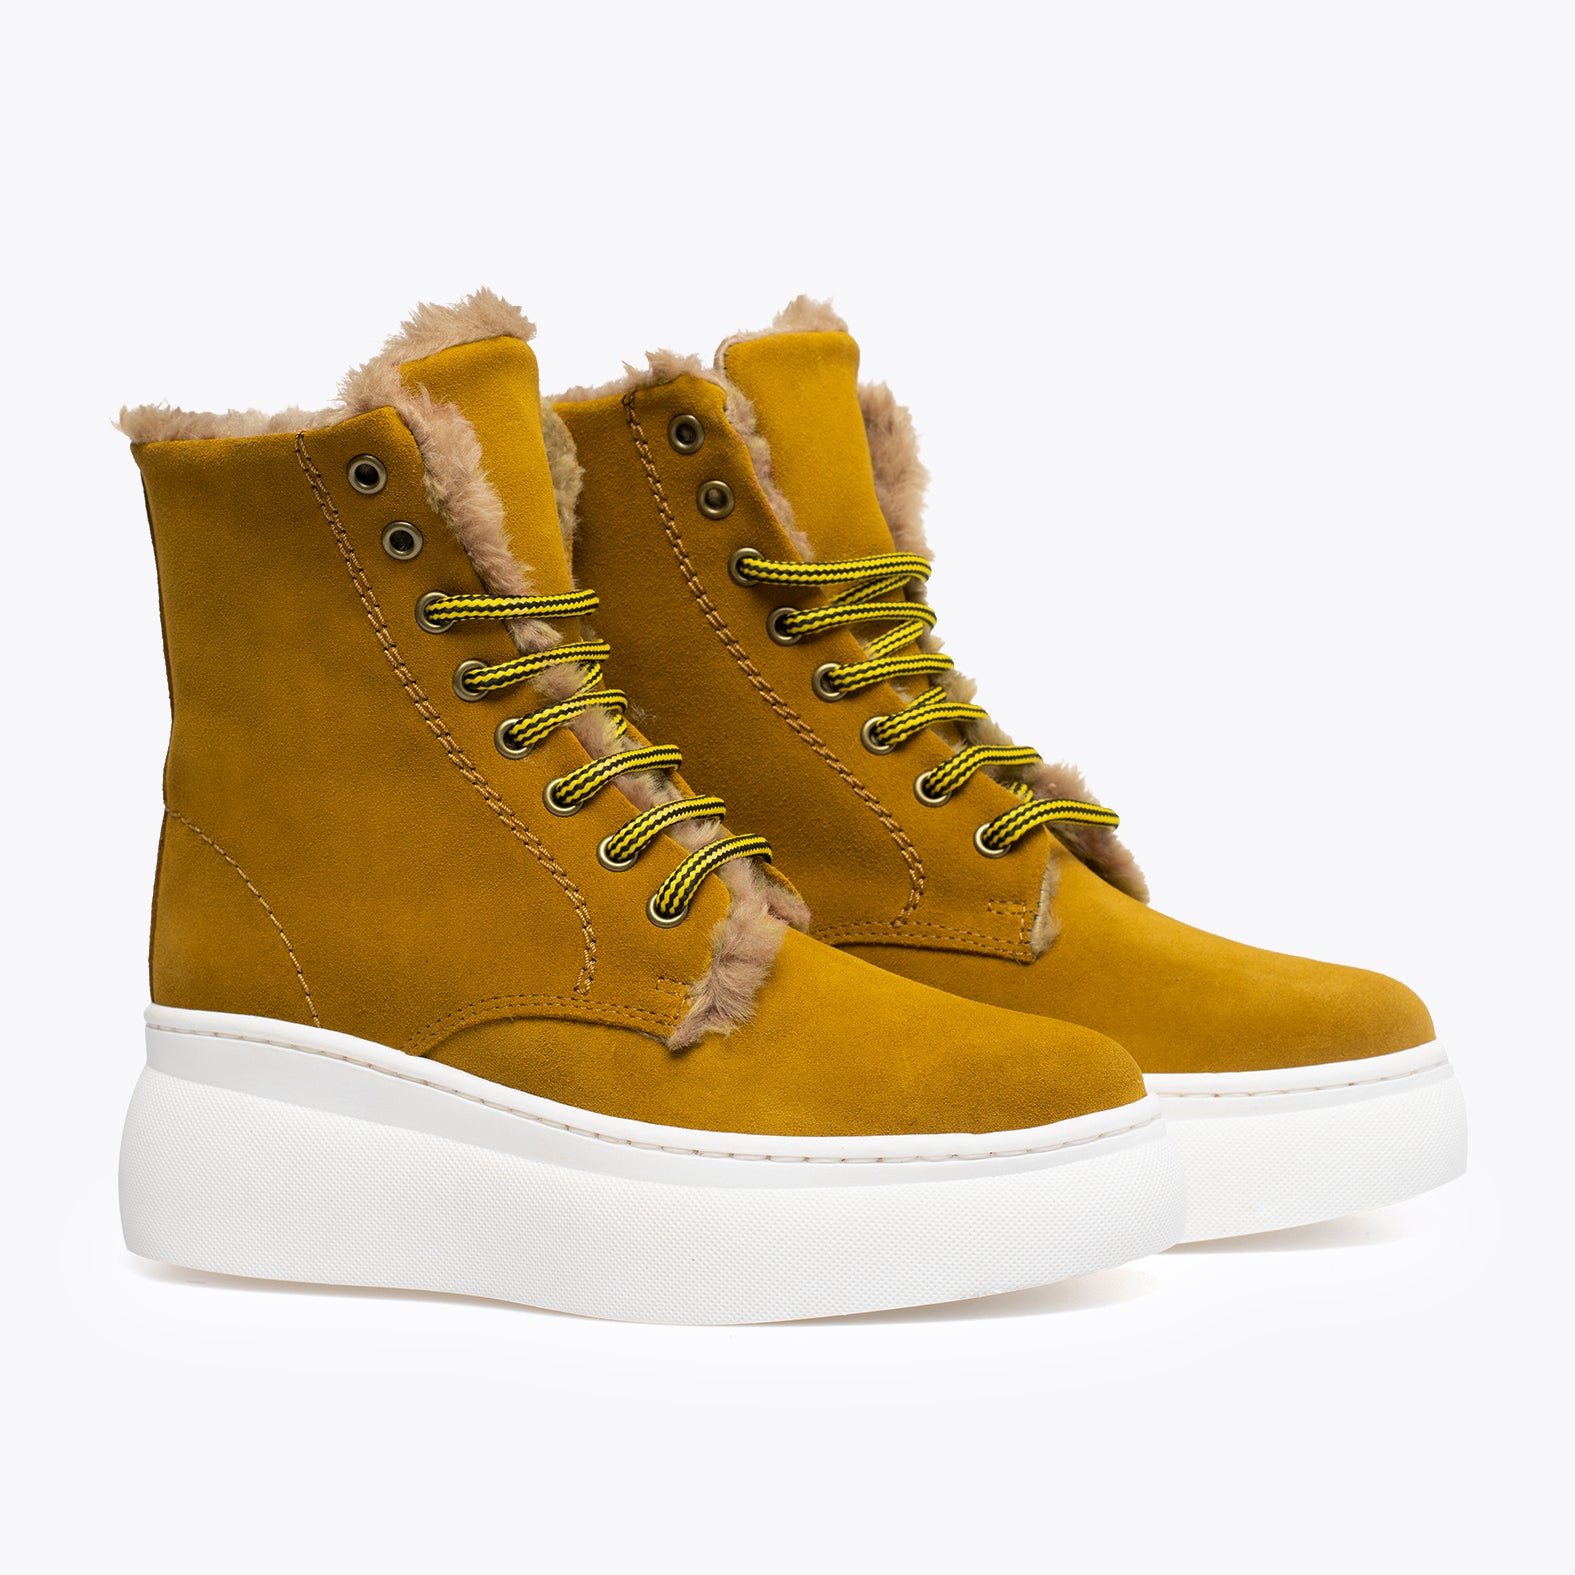 SNOW BOOTIE - YELLOW lace-up bootie